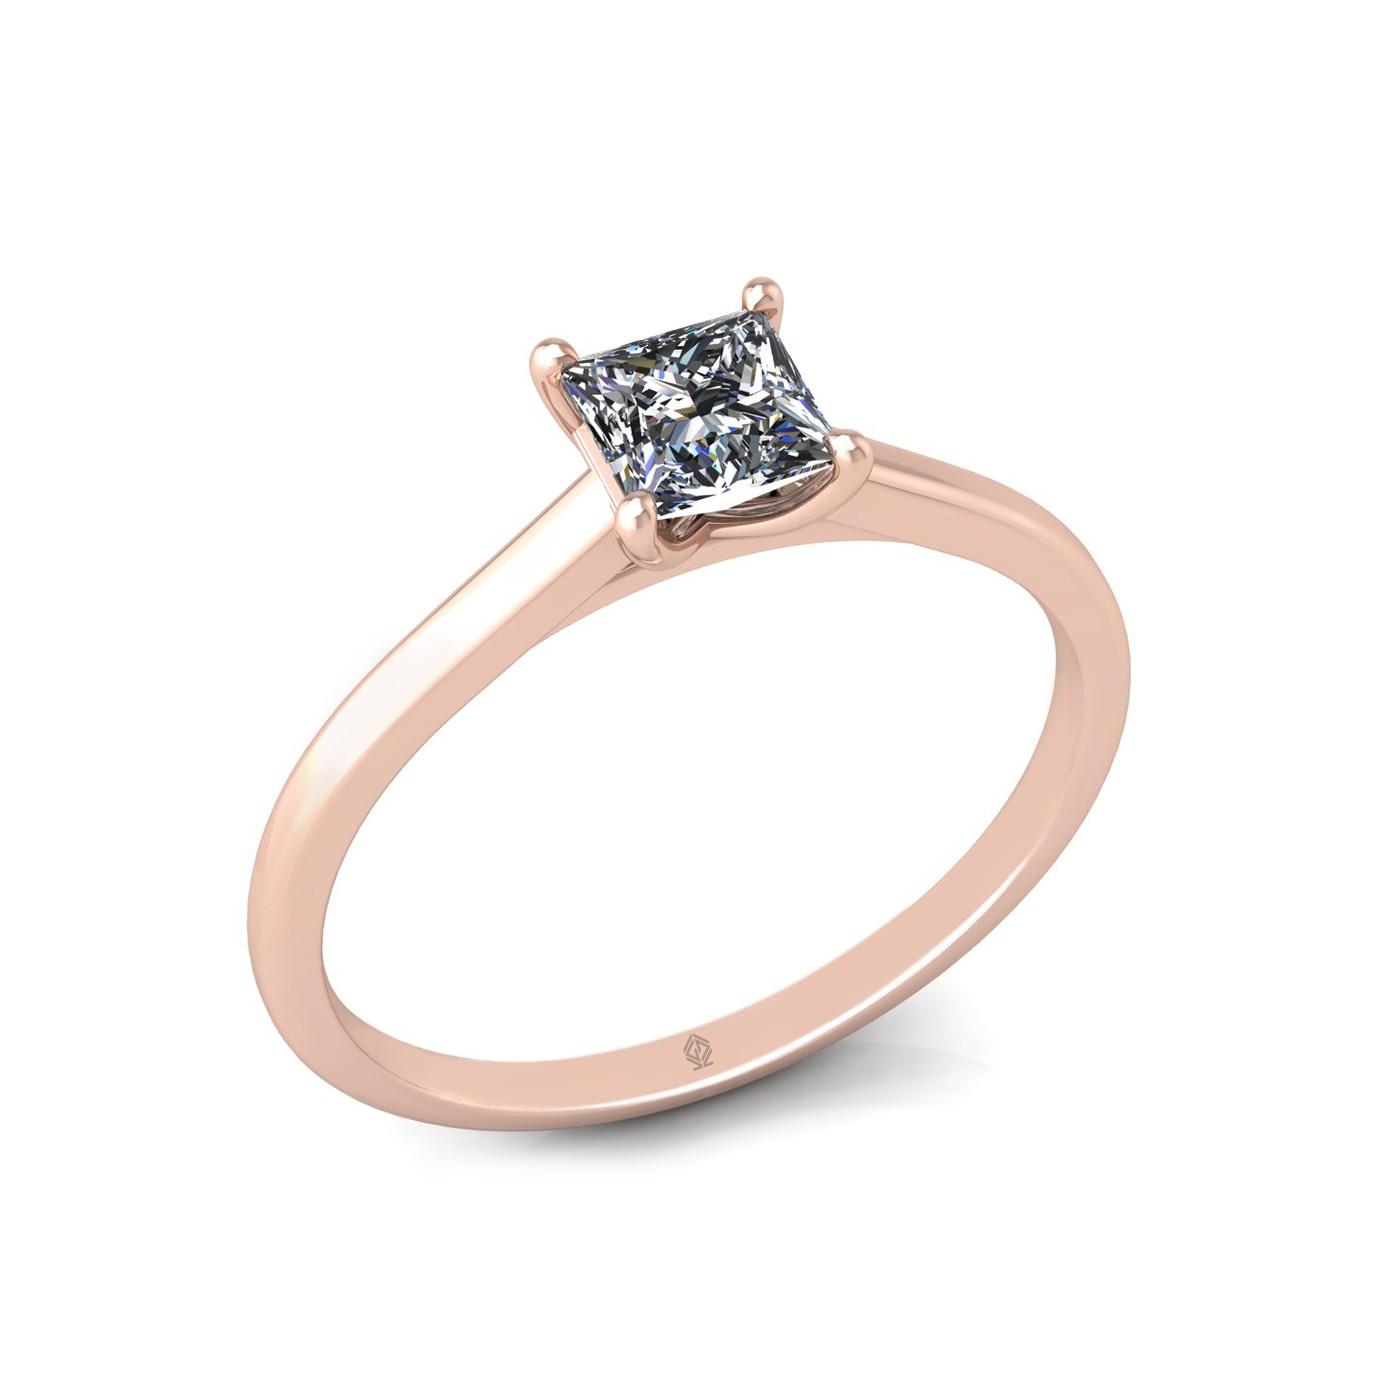 18k rose gold  0,50 ct 4 prongs solitaire princess cut diamond engagement ring with whisper thin band